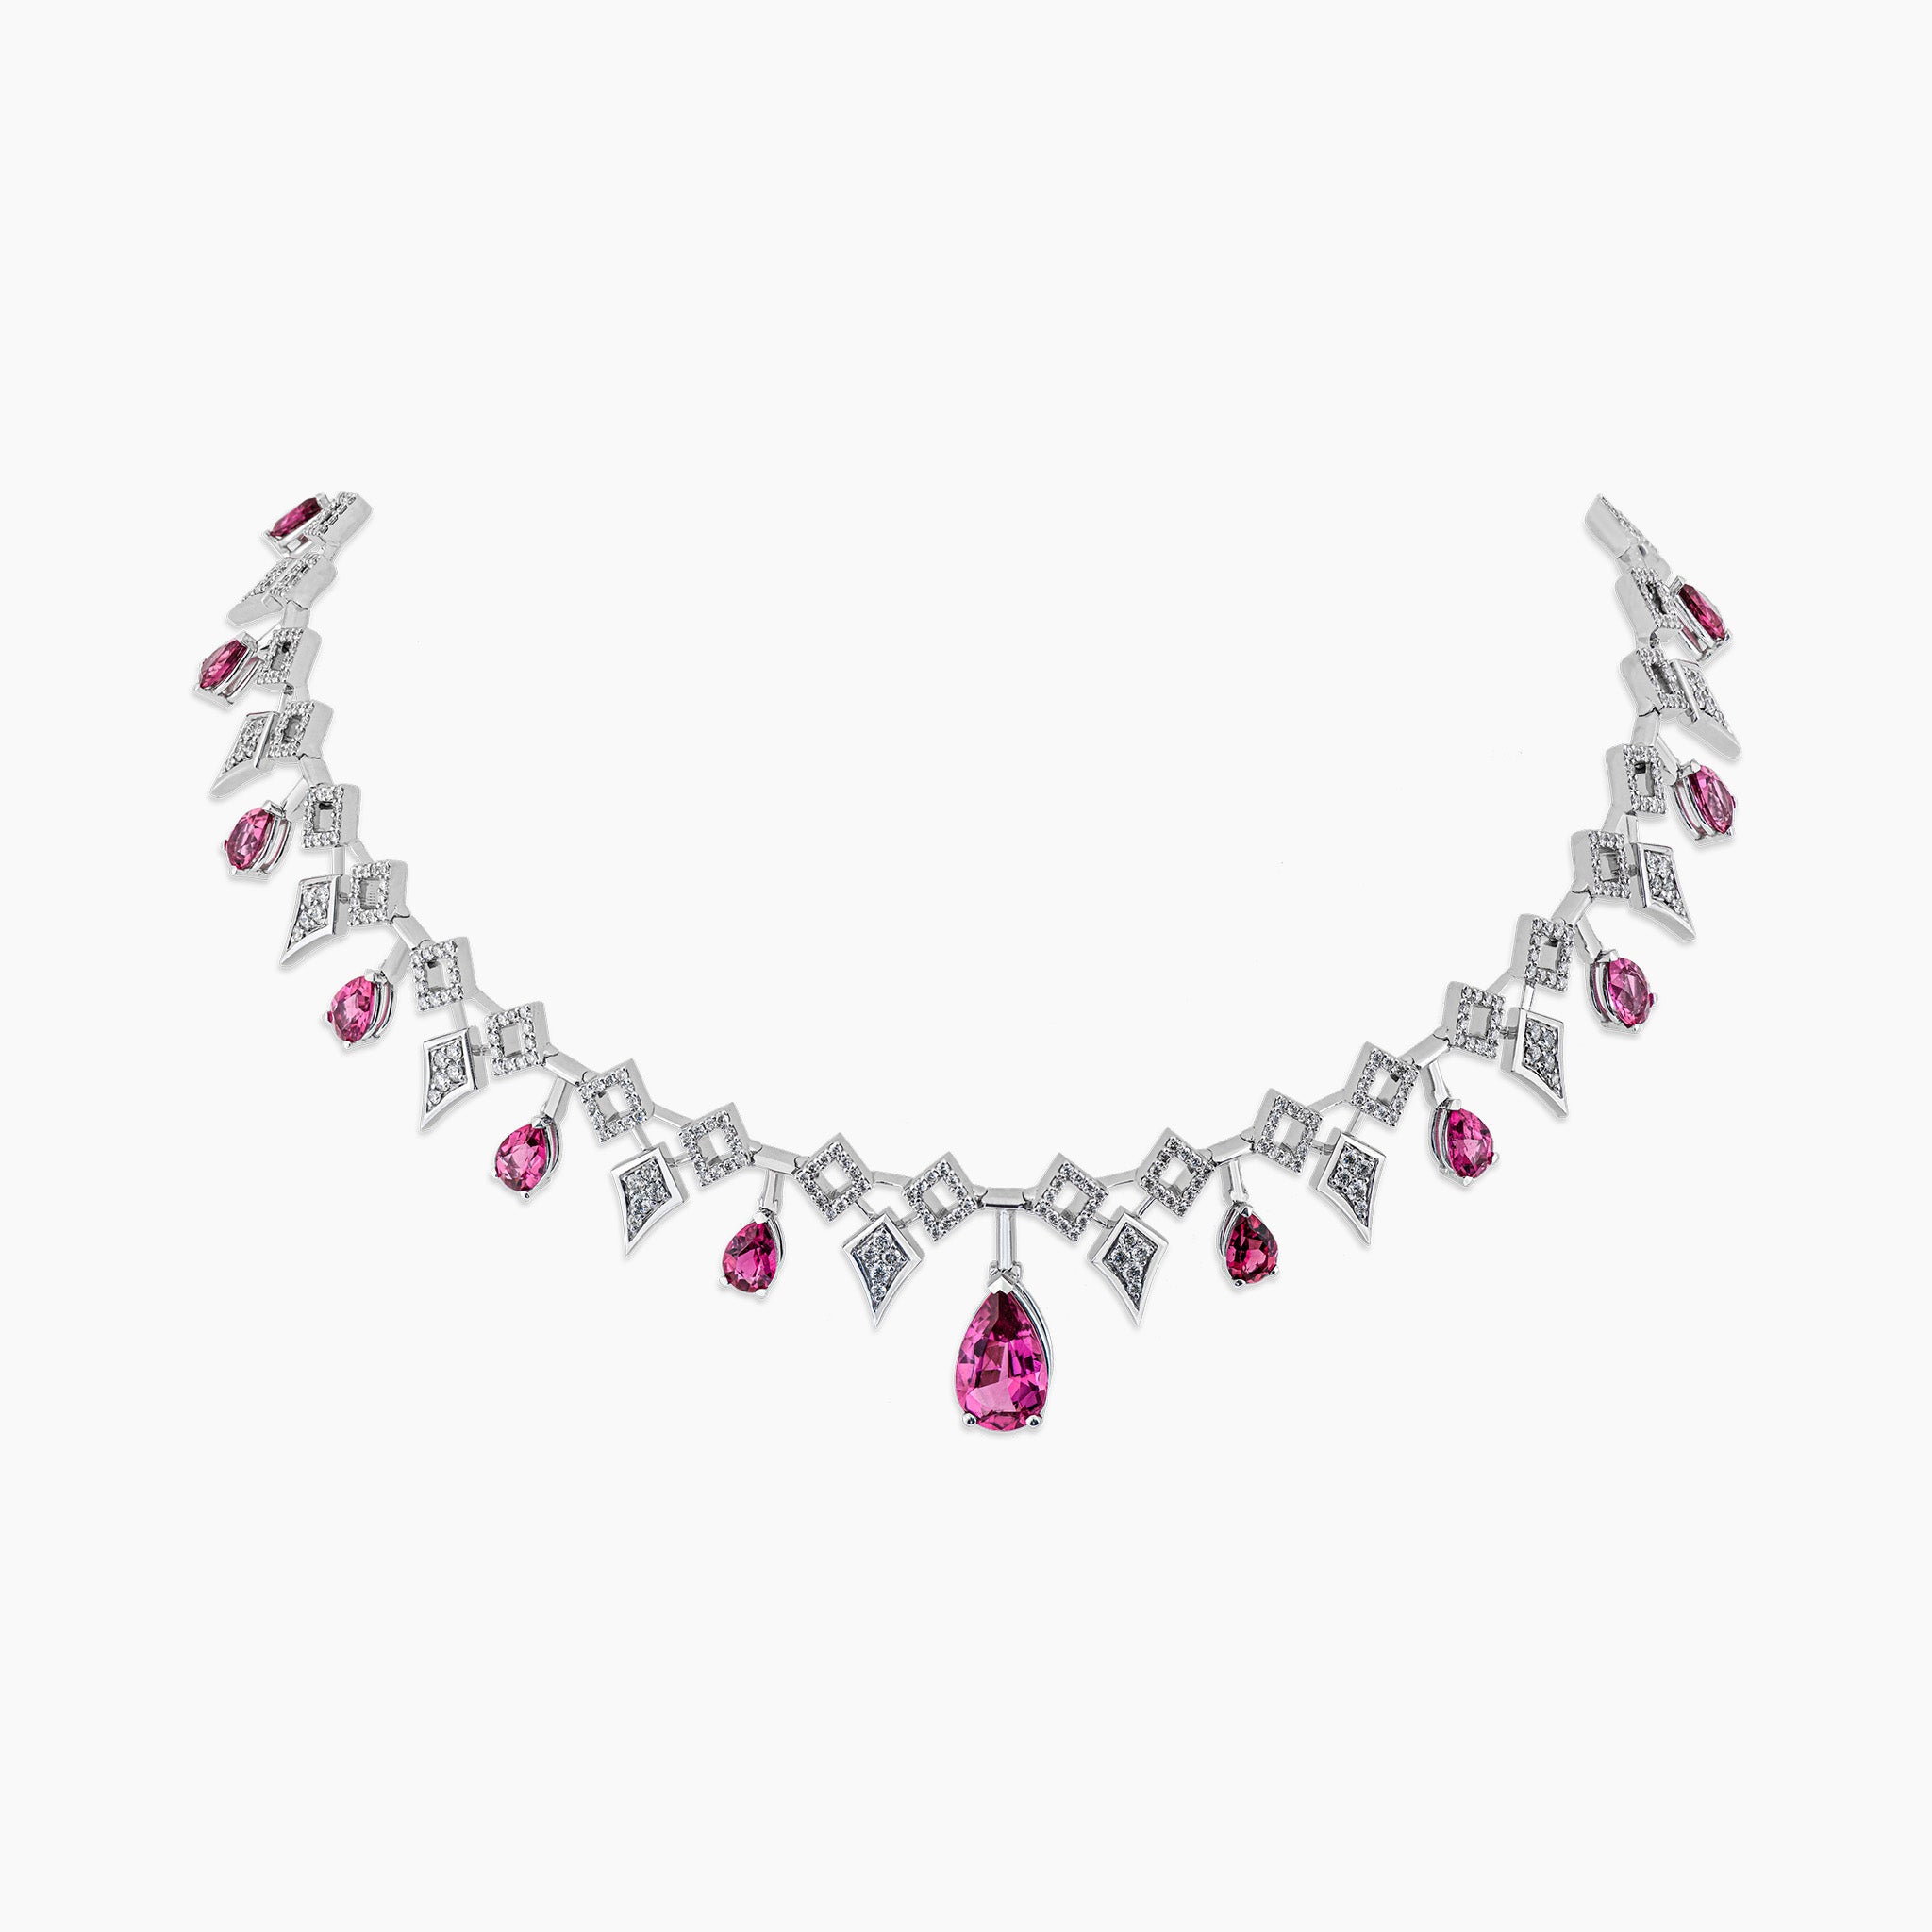 Inferno Choker: A captivating choker adorned with rubellite gemstones and diamonds set in white gold, presented against an off-white background.